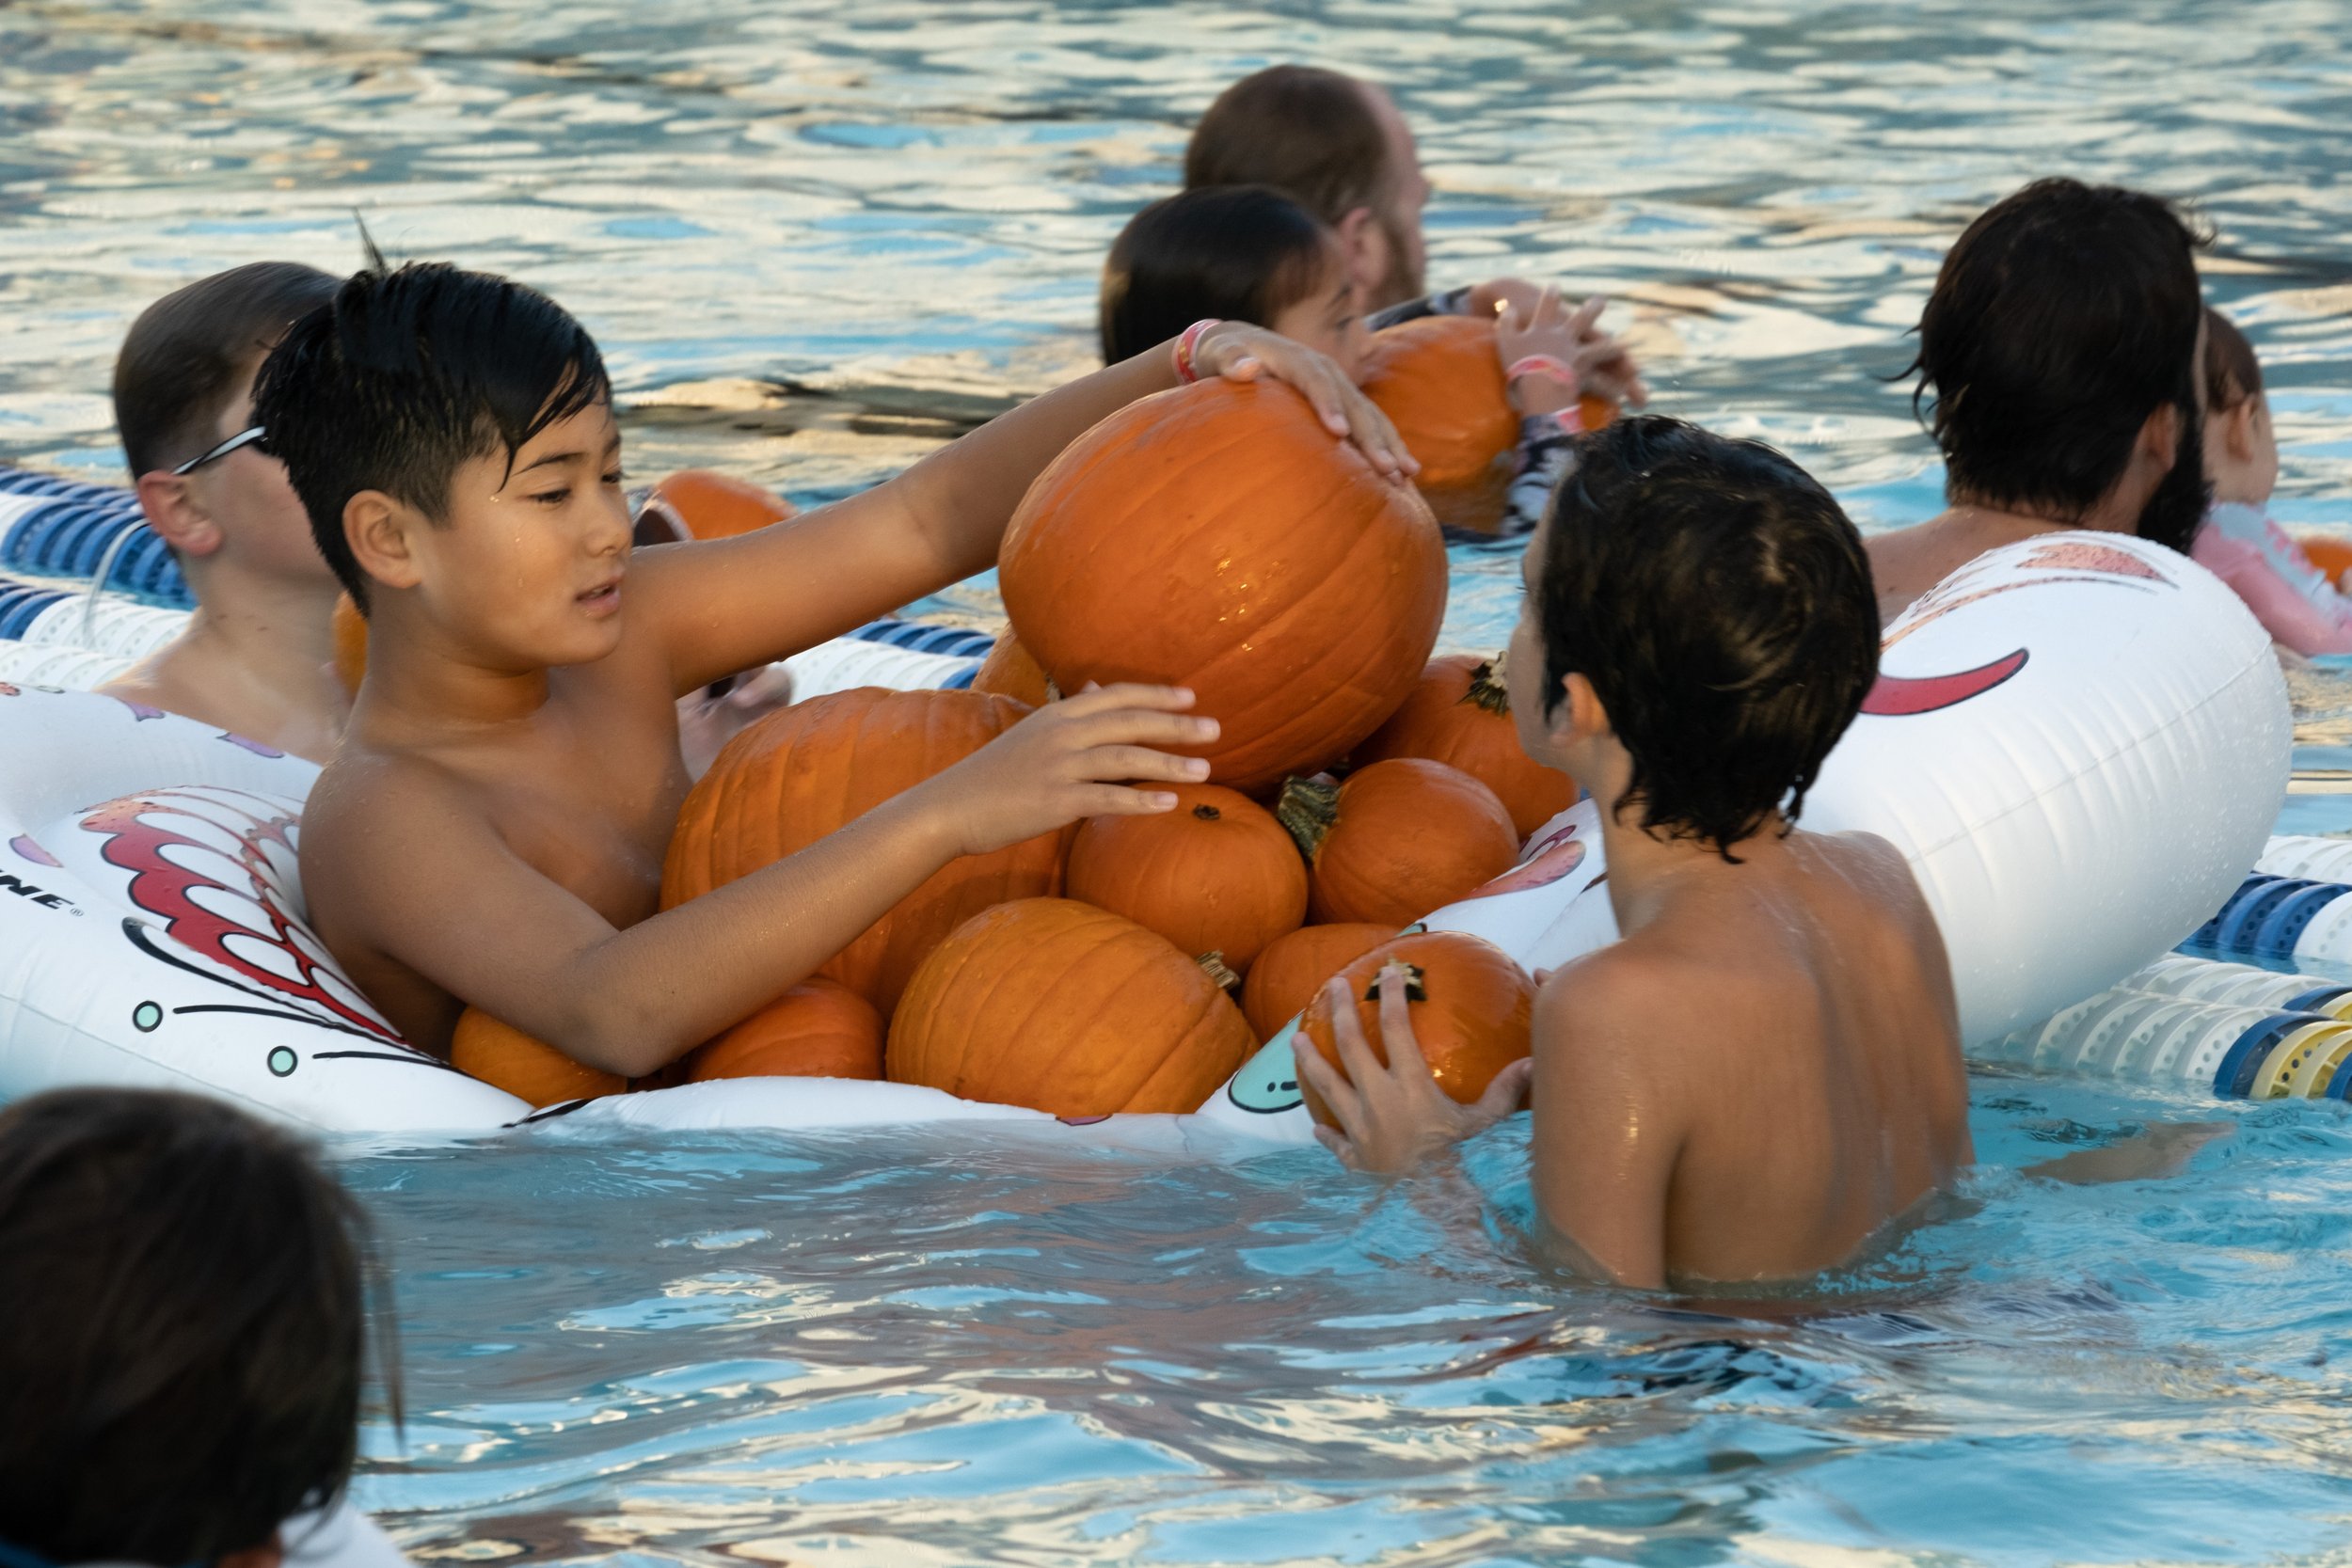  On Friday, October 27th, the Santa Monica Swim Center held their Halloween Spooky Splash Spectacular. Children of all ages splashed in the Floating Pumpkin Patch in Santa Monica, Calif. (Akemi Rico | The Corsair) 